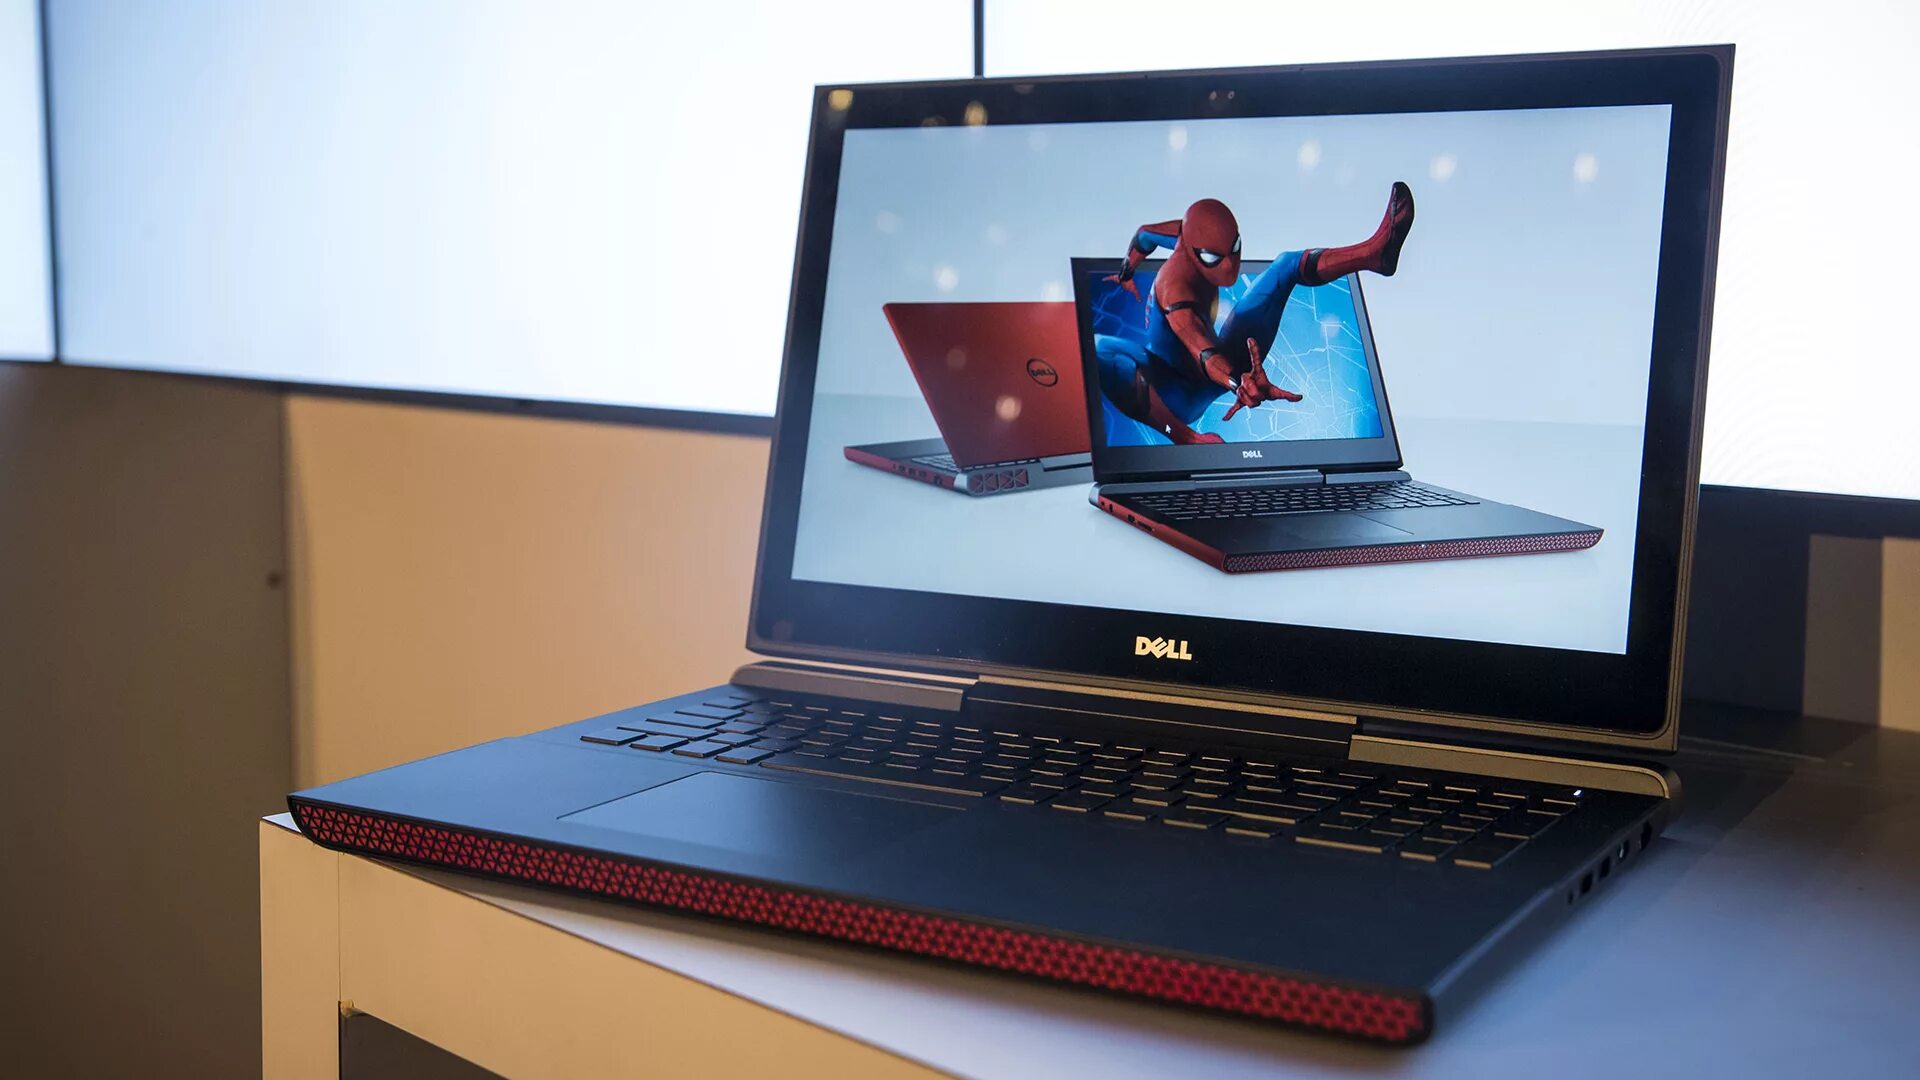 Dell 15 7000 gaming. Ноутбук dell Inspiron 15. Dell Inspiron 7000. Dell Inspiron 15 7000. Ноутбук Делл Inspiron 15.